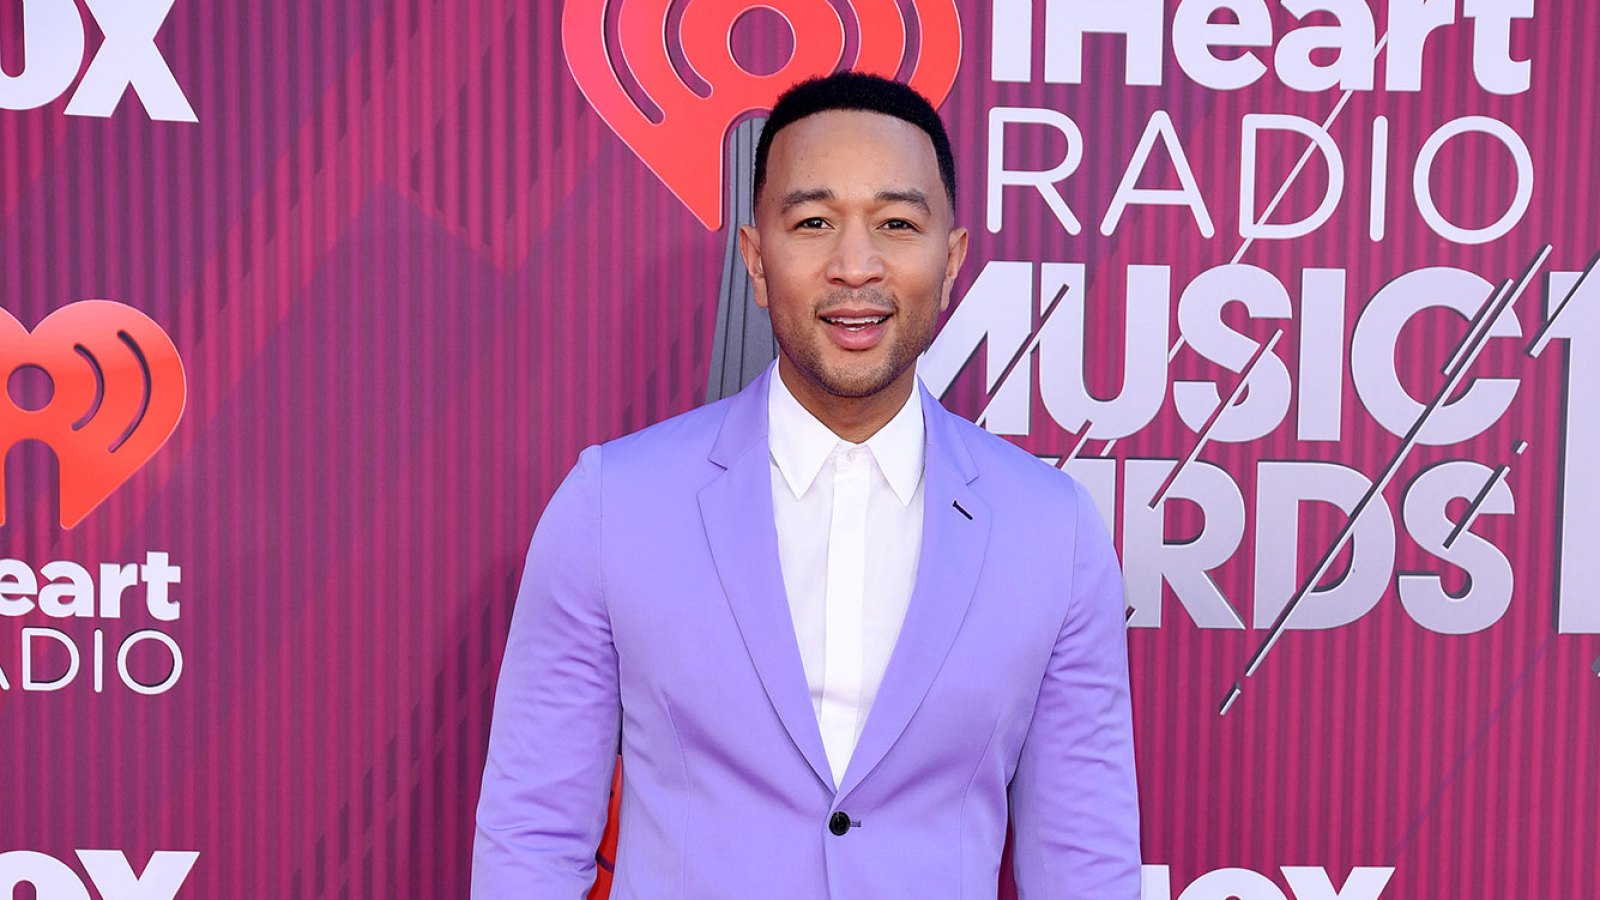 John Legend and Kiehl's Teamed Up on a Face Mask For a Good Cause